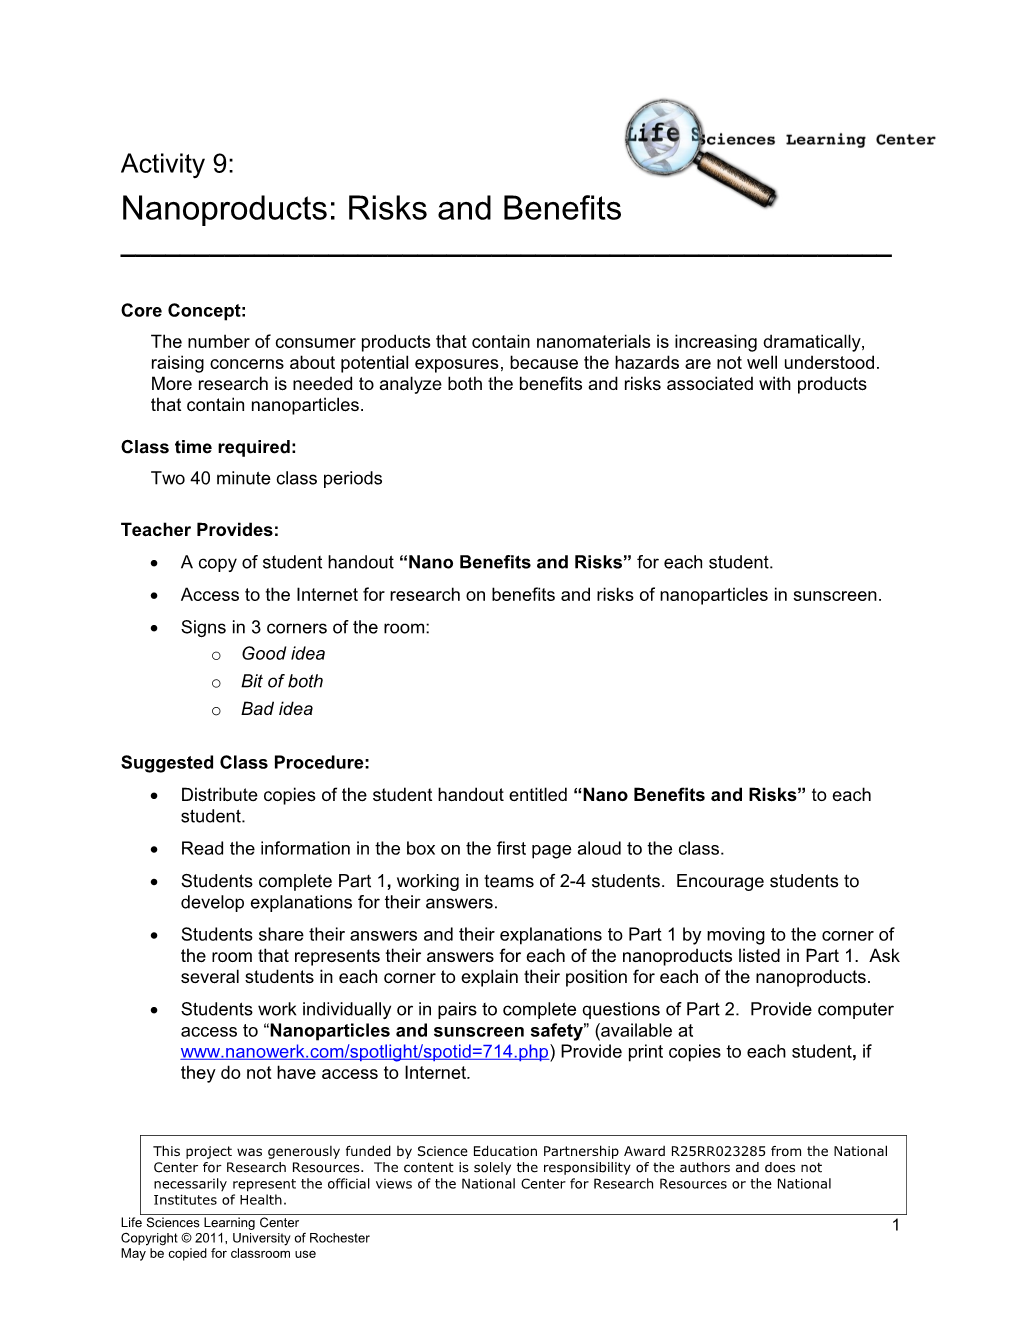 Nanoproducts: Risks and Benefits